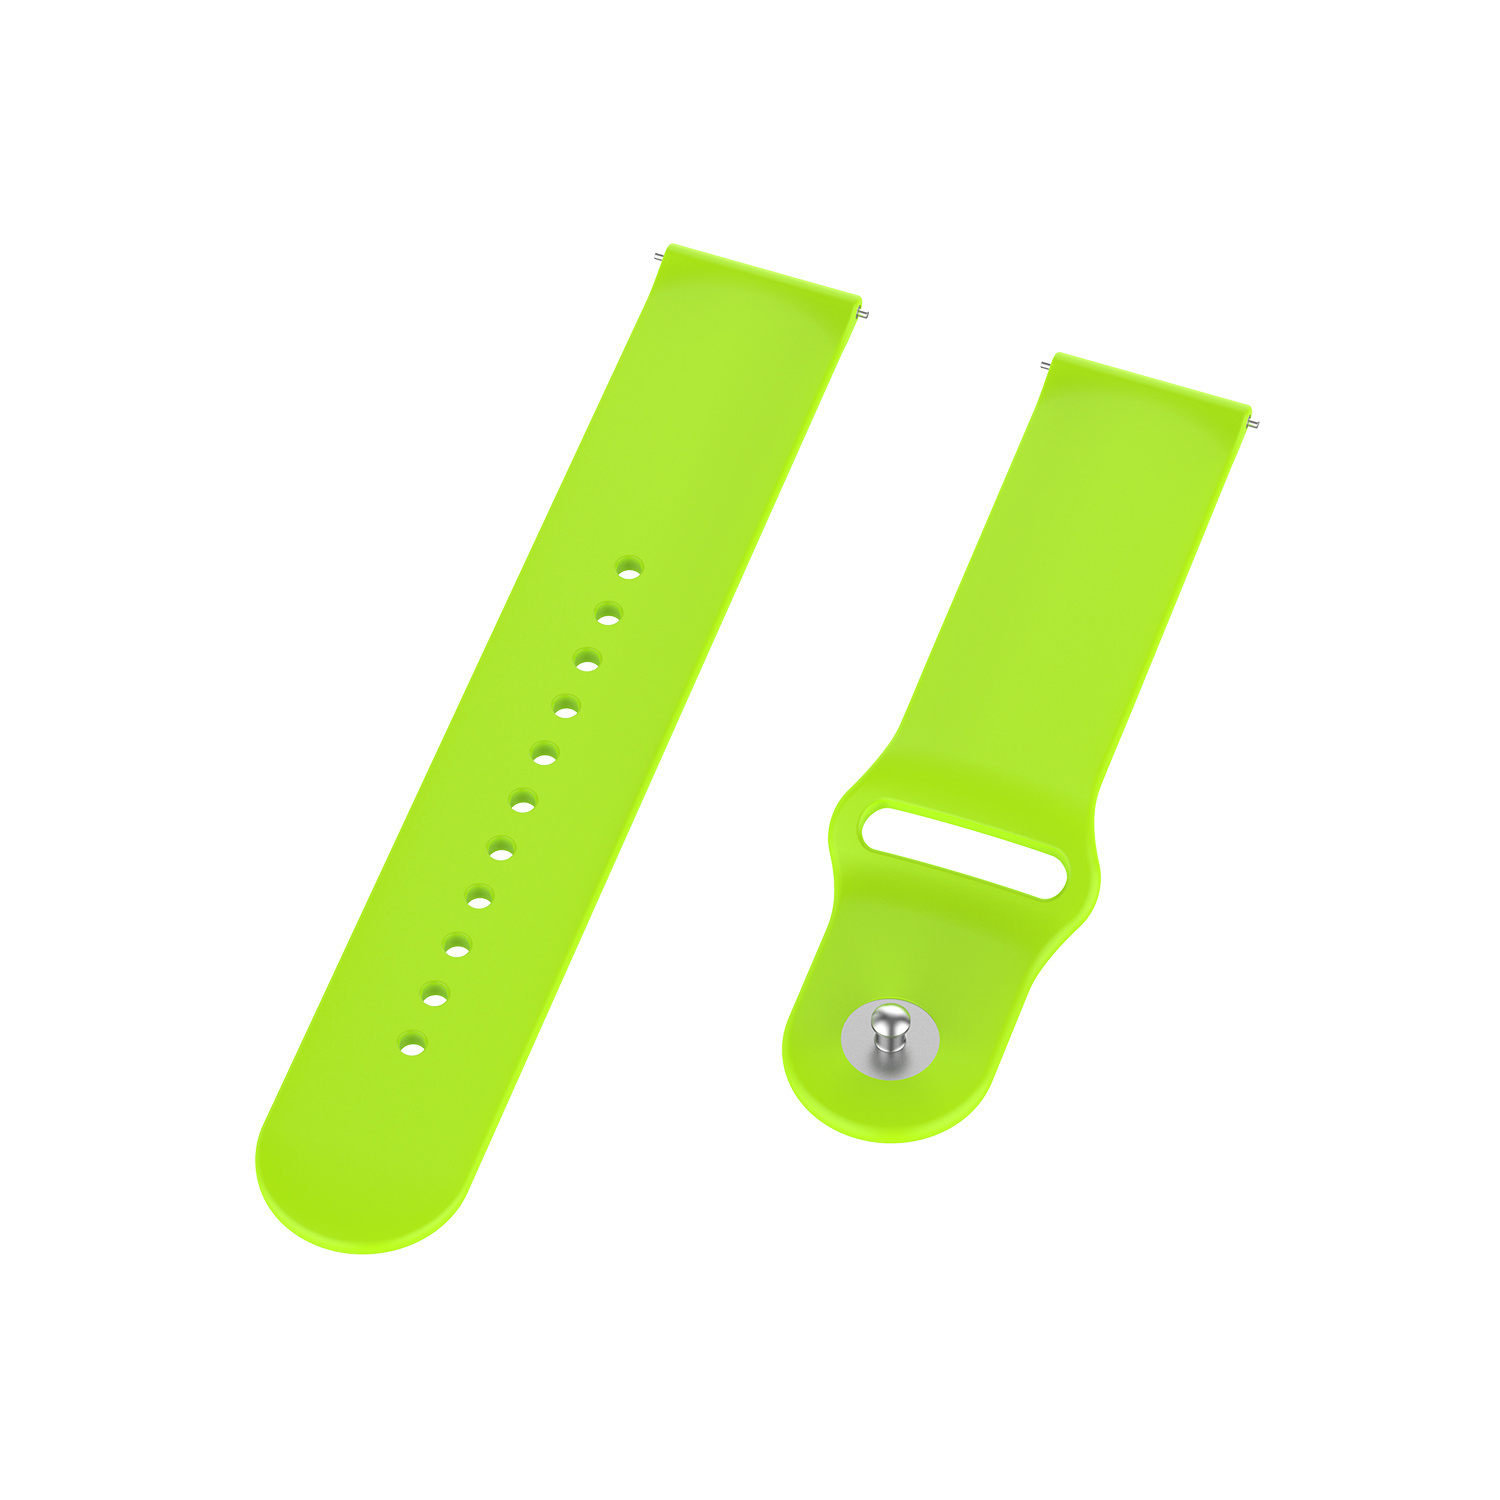 Huawei Watch Gt Silicone Sport Strap - Lime